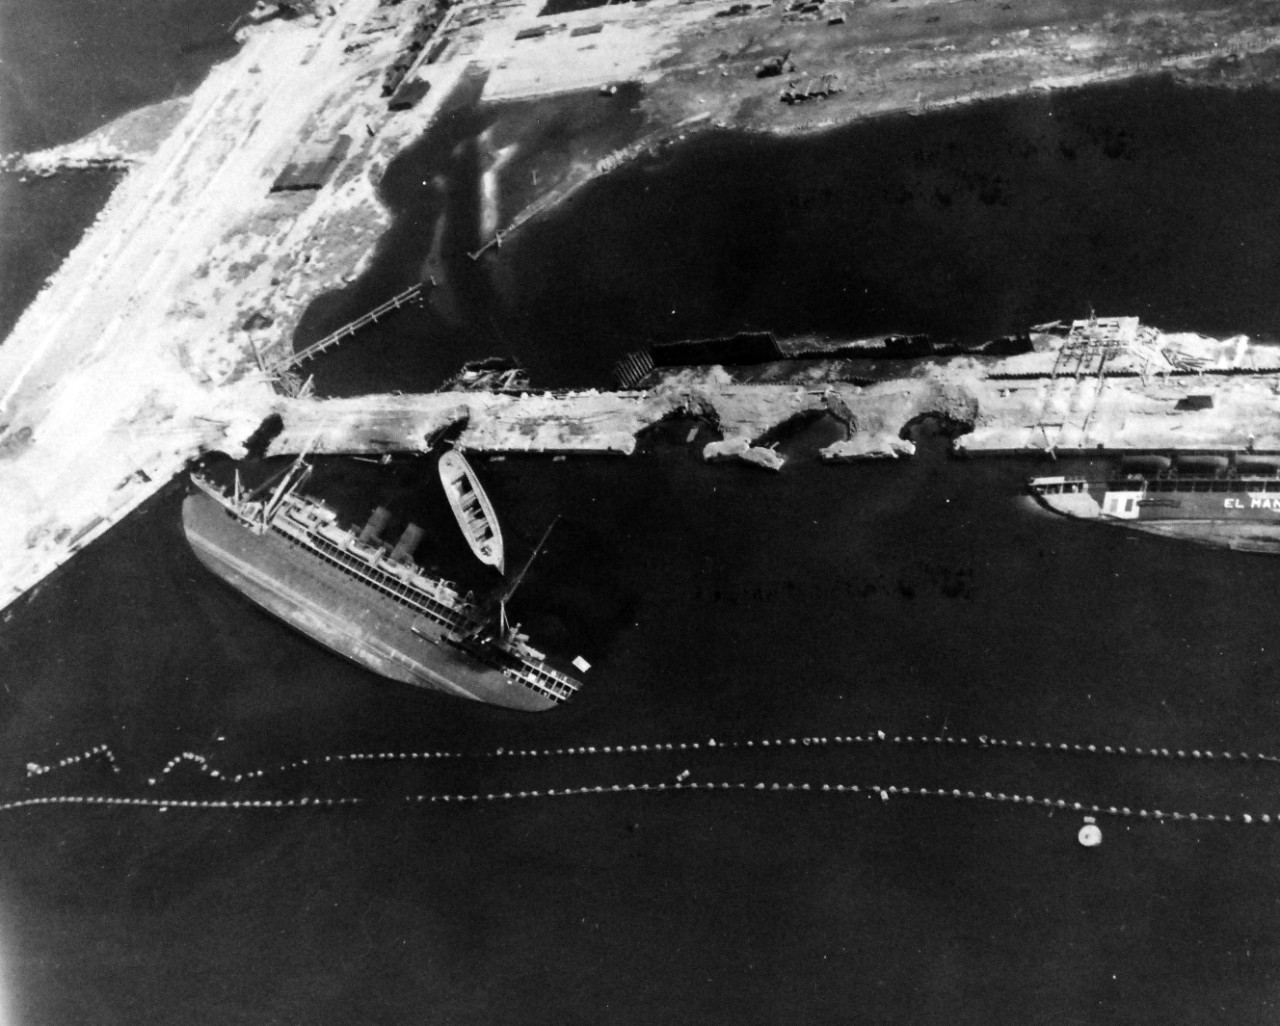 80-G-364030:  Invasion of Southern France, Toulon, August 1944.   Aerial view of the destruction to the harbor and installations at Toulon, France.  Taken by crew of USS Catoctin (AGC-5).  Photograph received on 2 April 1946.   Official U.S. Navy Photograph, now in the collections of the National Archives.  (2014/7/10).